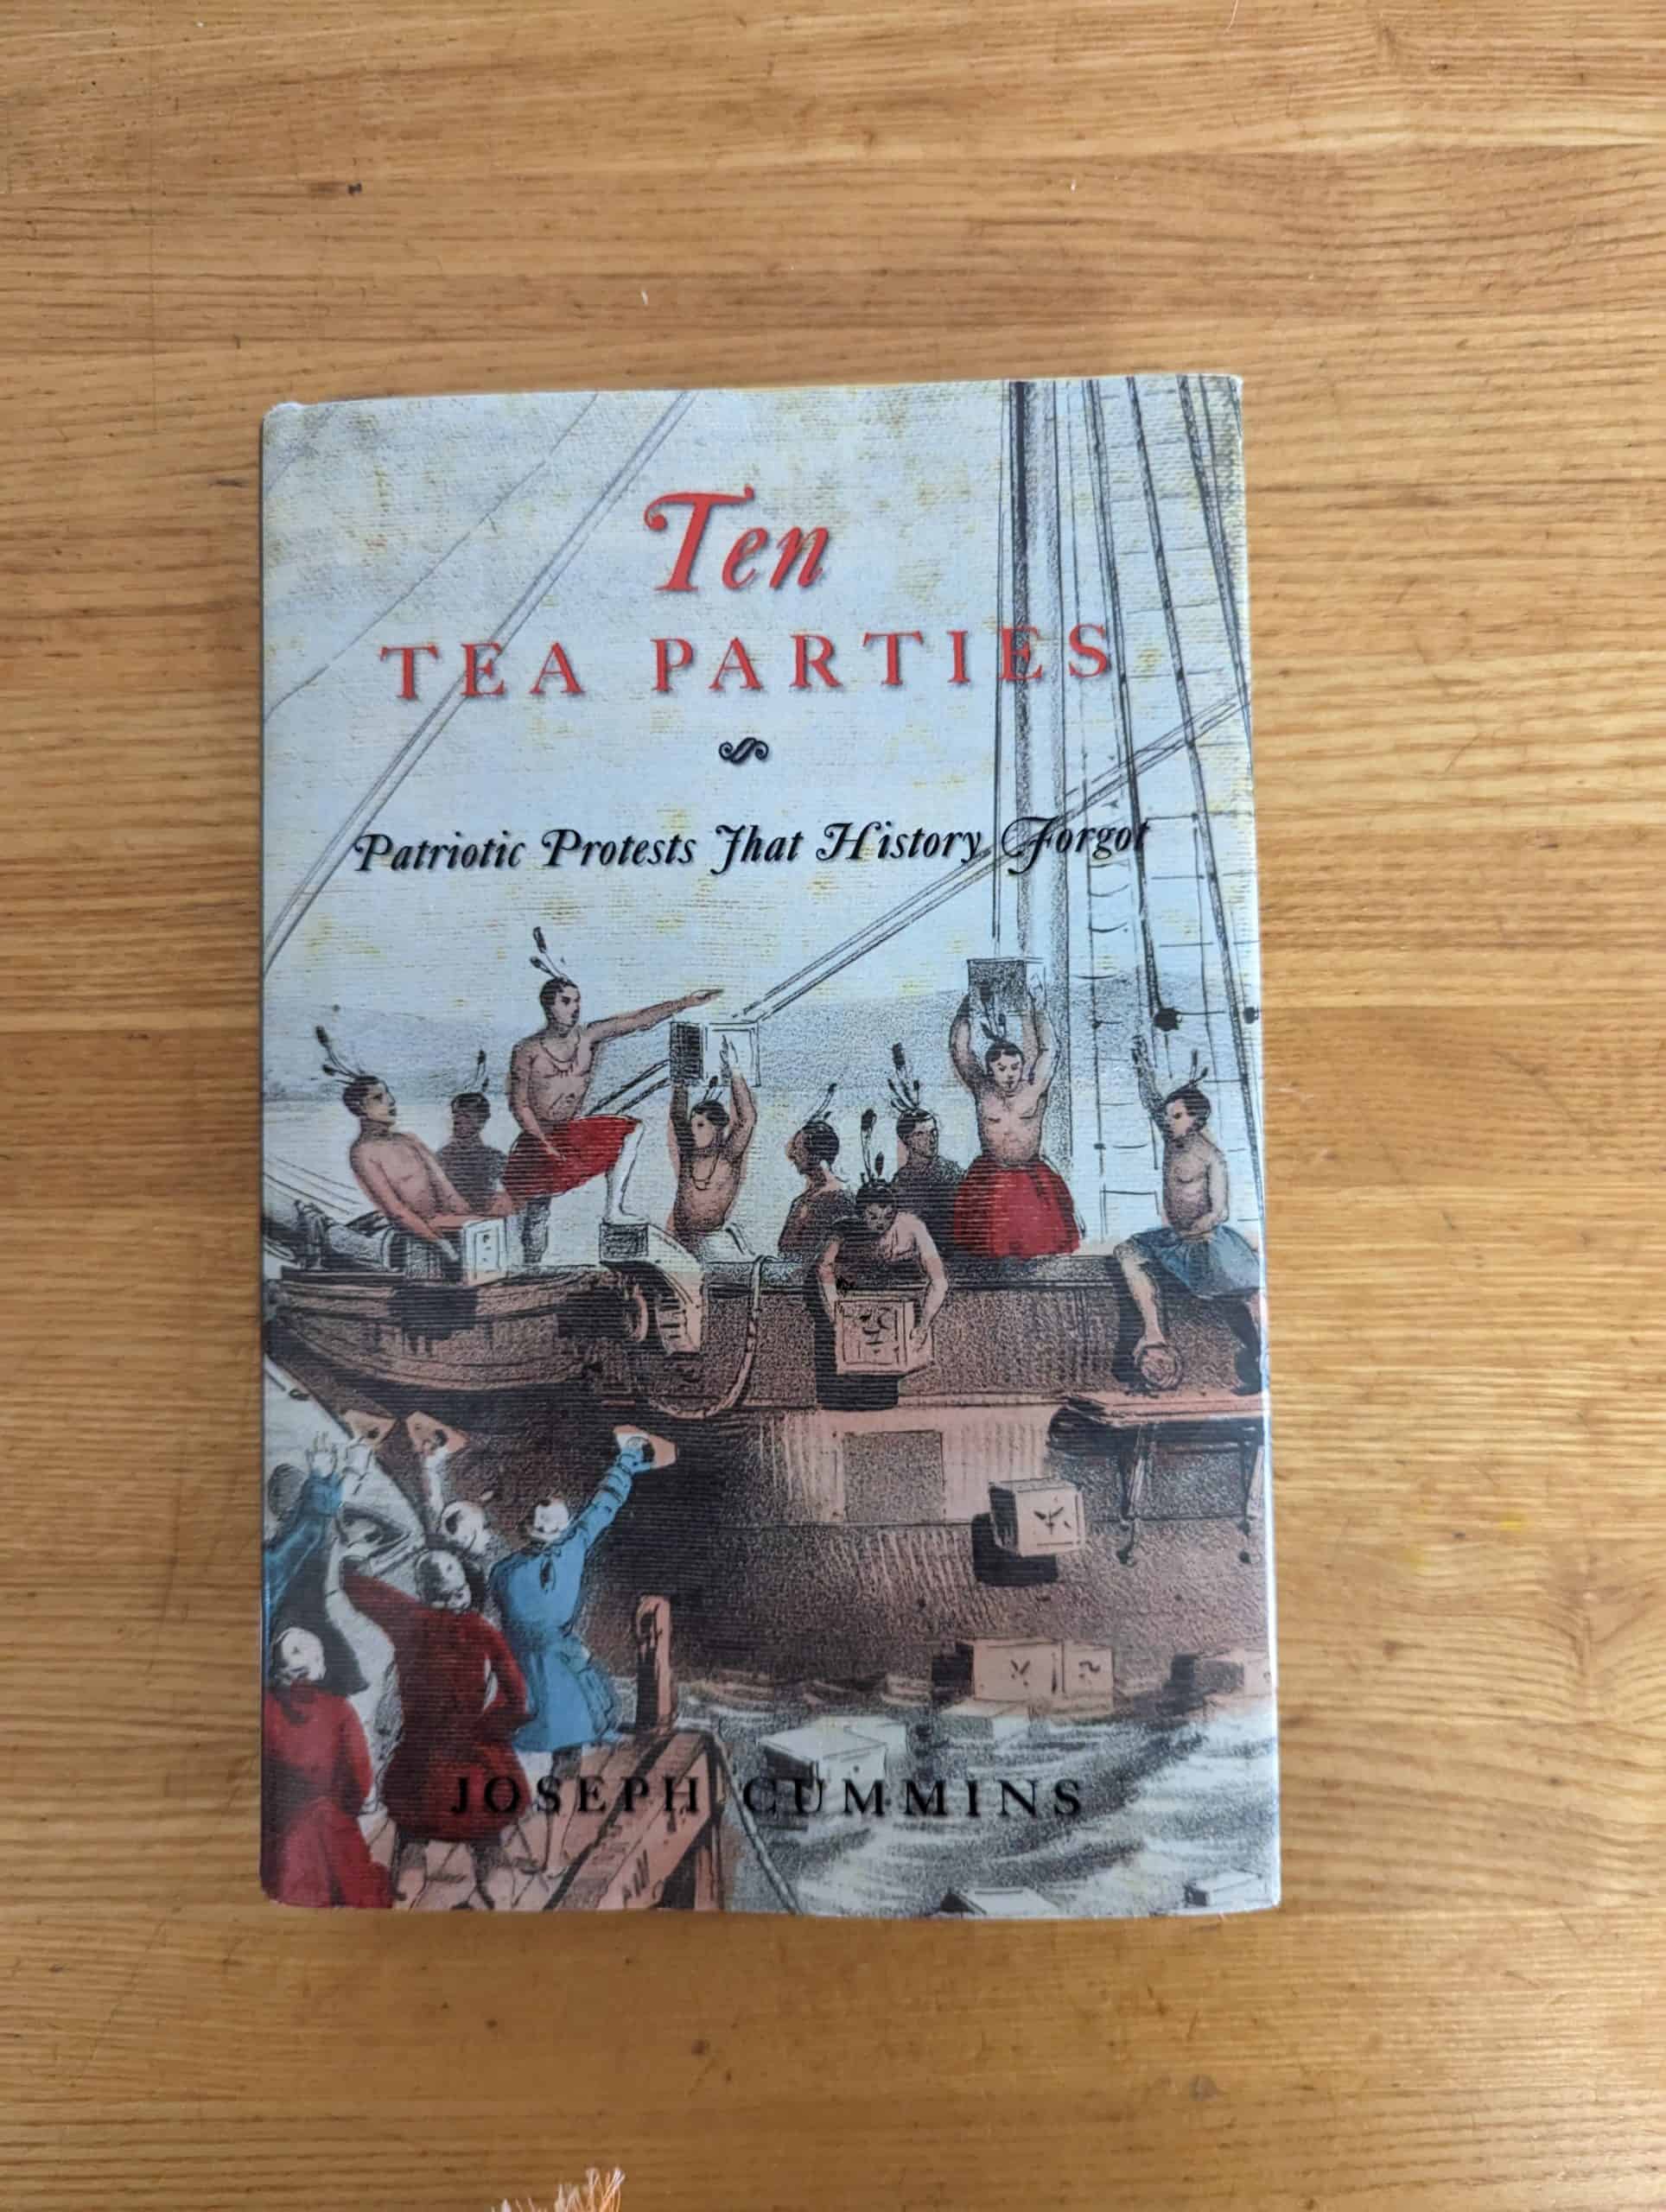 The Ten Tea Parties-Historic Book Discussion with Leslie Howard